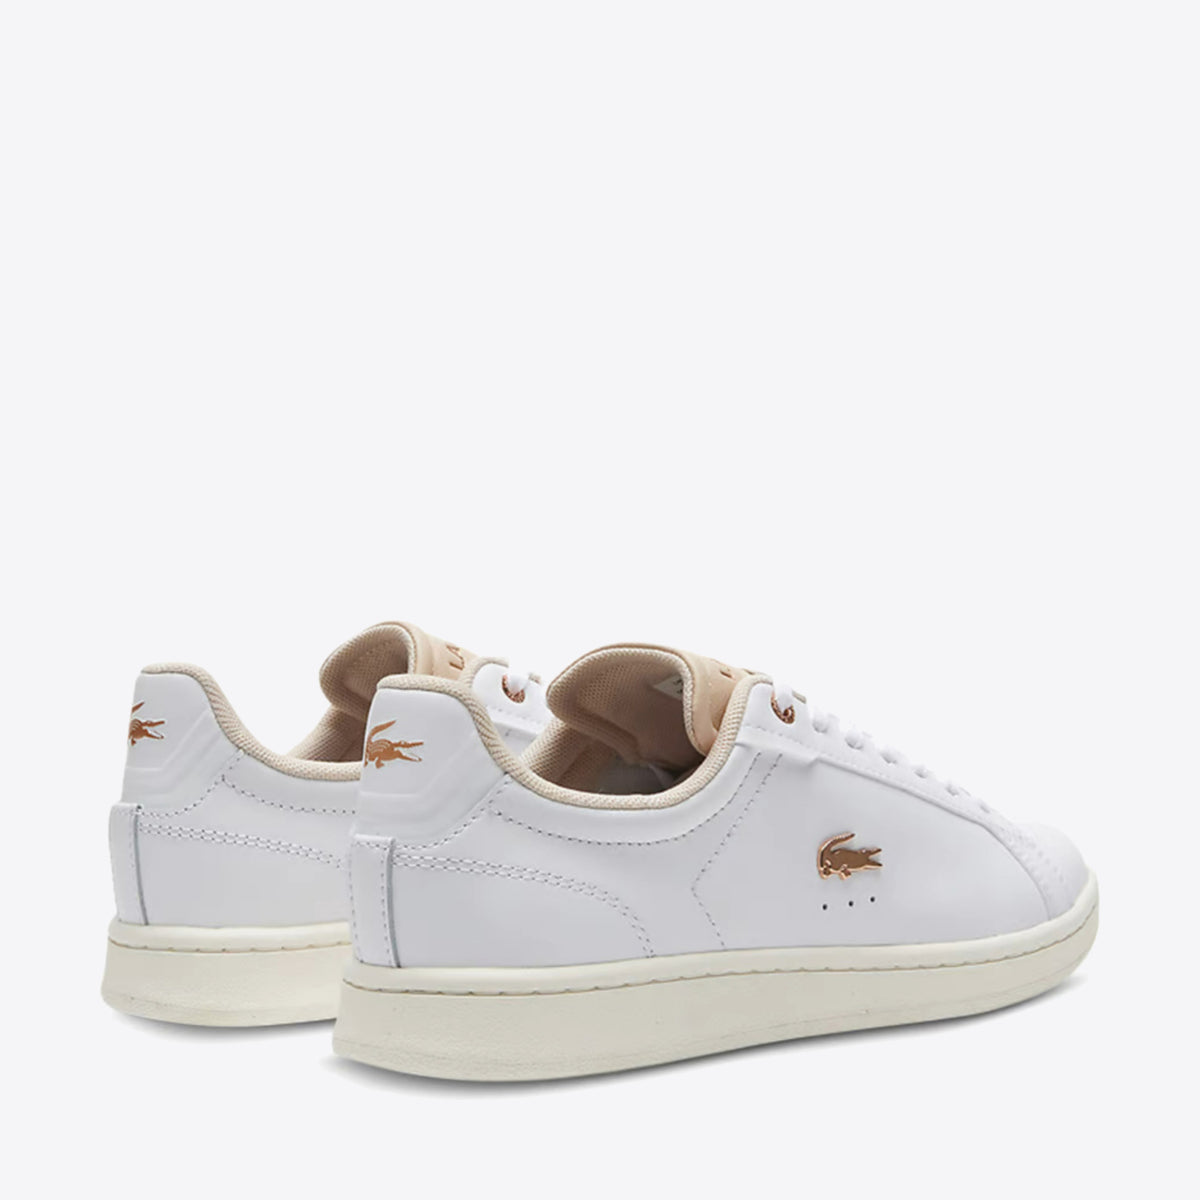 LACOSTE Carnaby Pro White/Off White - Image 3